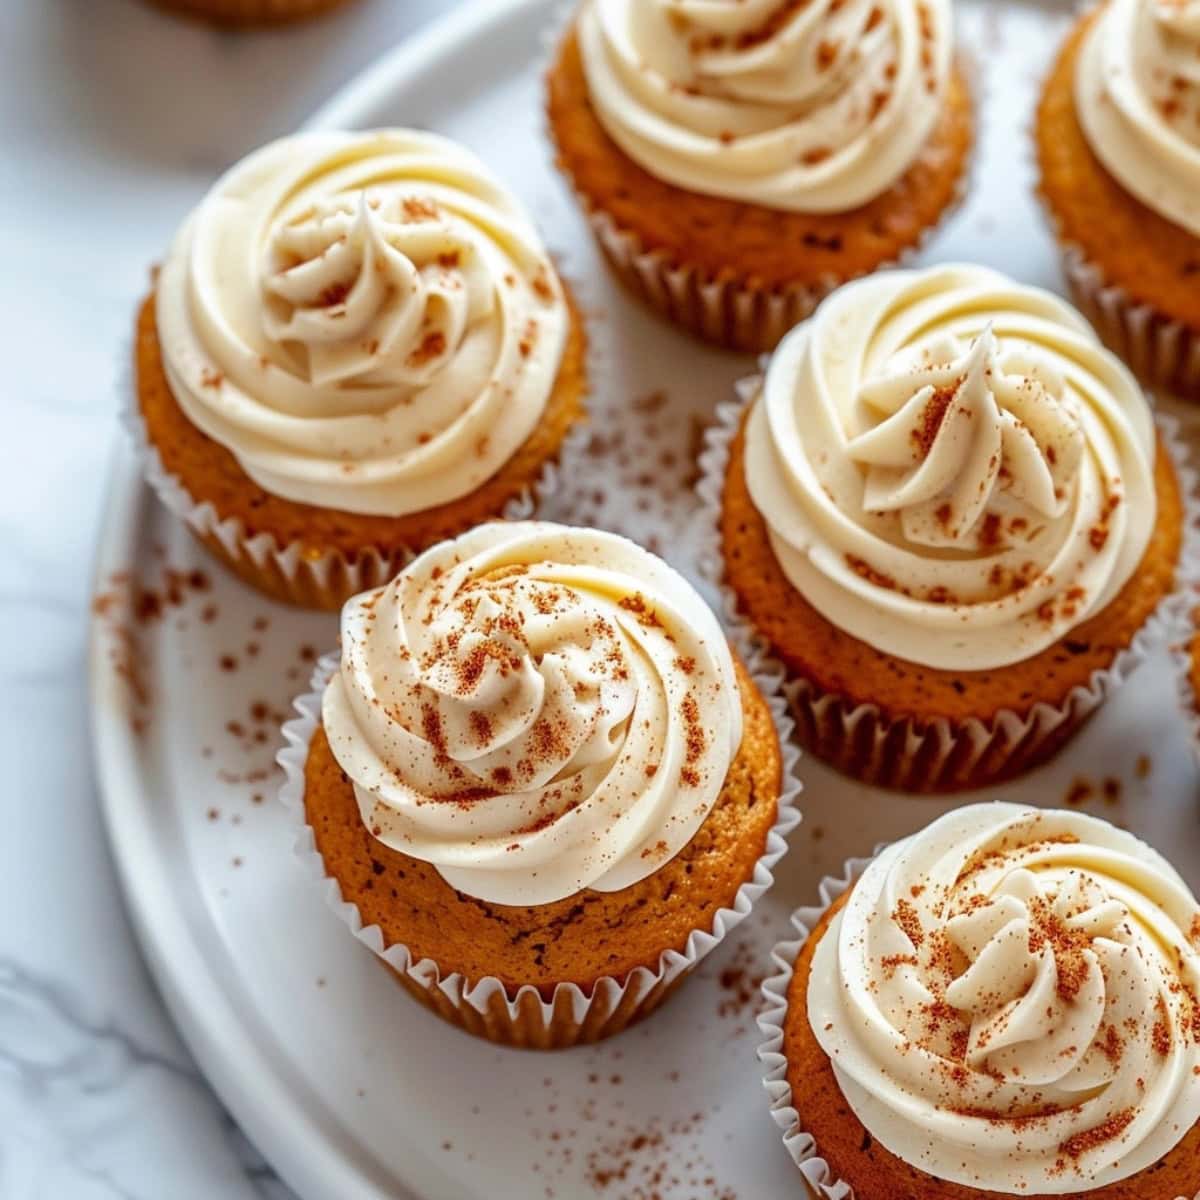 Pumpkin cupcakes with cream cheese frosting arranged on a white plate, sprinkled with pumpkin spice.